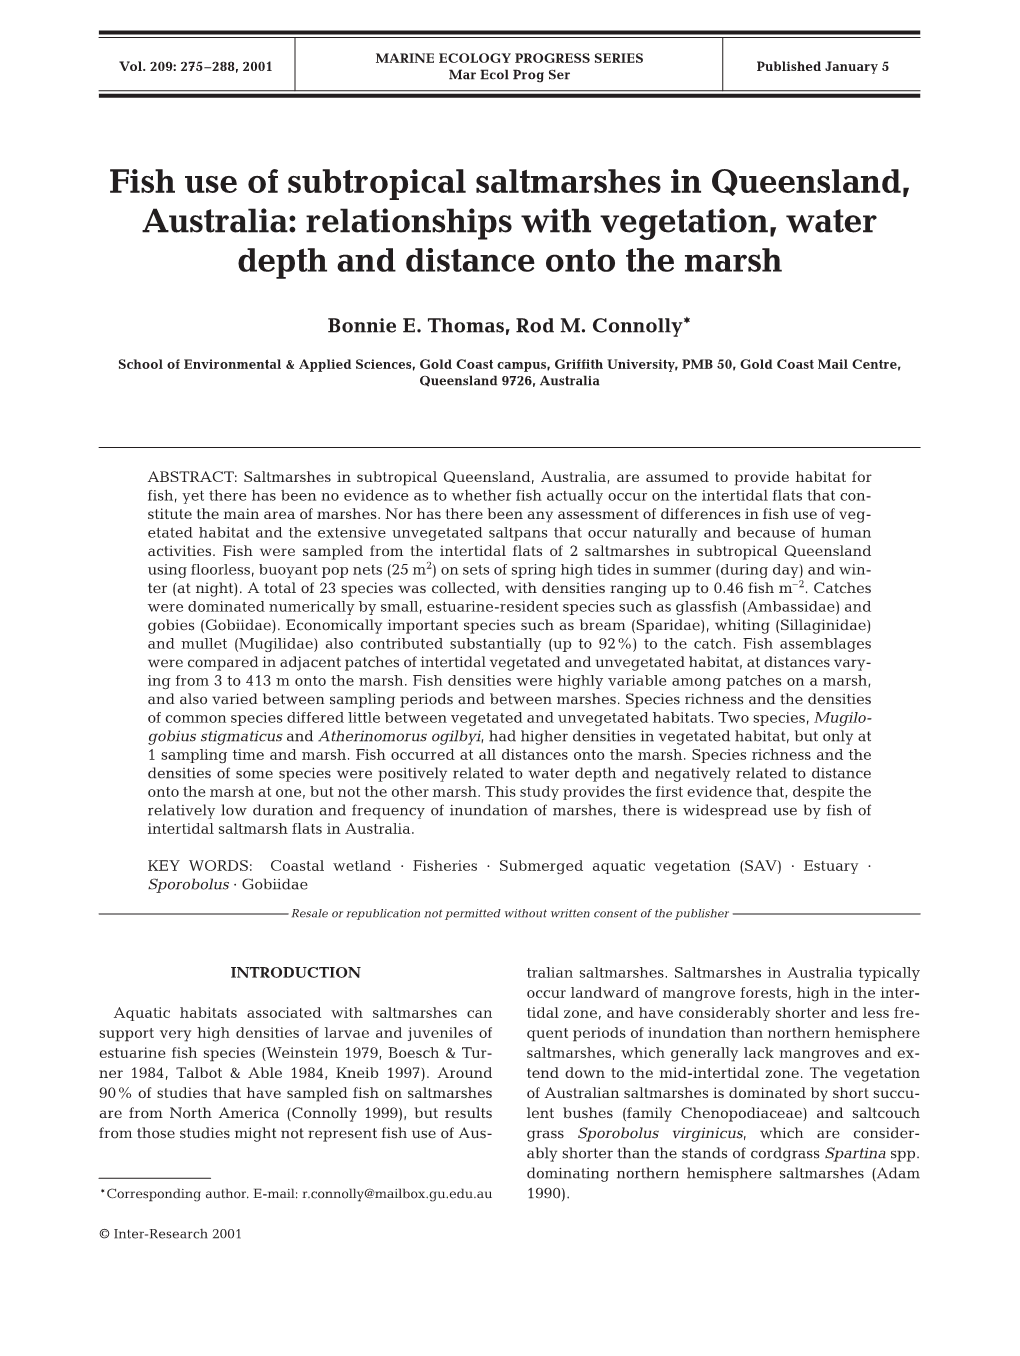 Fish Use of Subtropical Saltmarshes in Queensland, Australia: Relationships with Vegetation, Water Depth and Distance Onto the Marsh